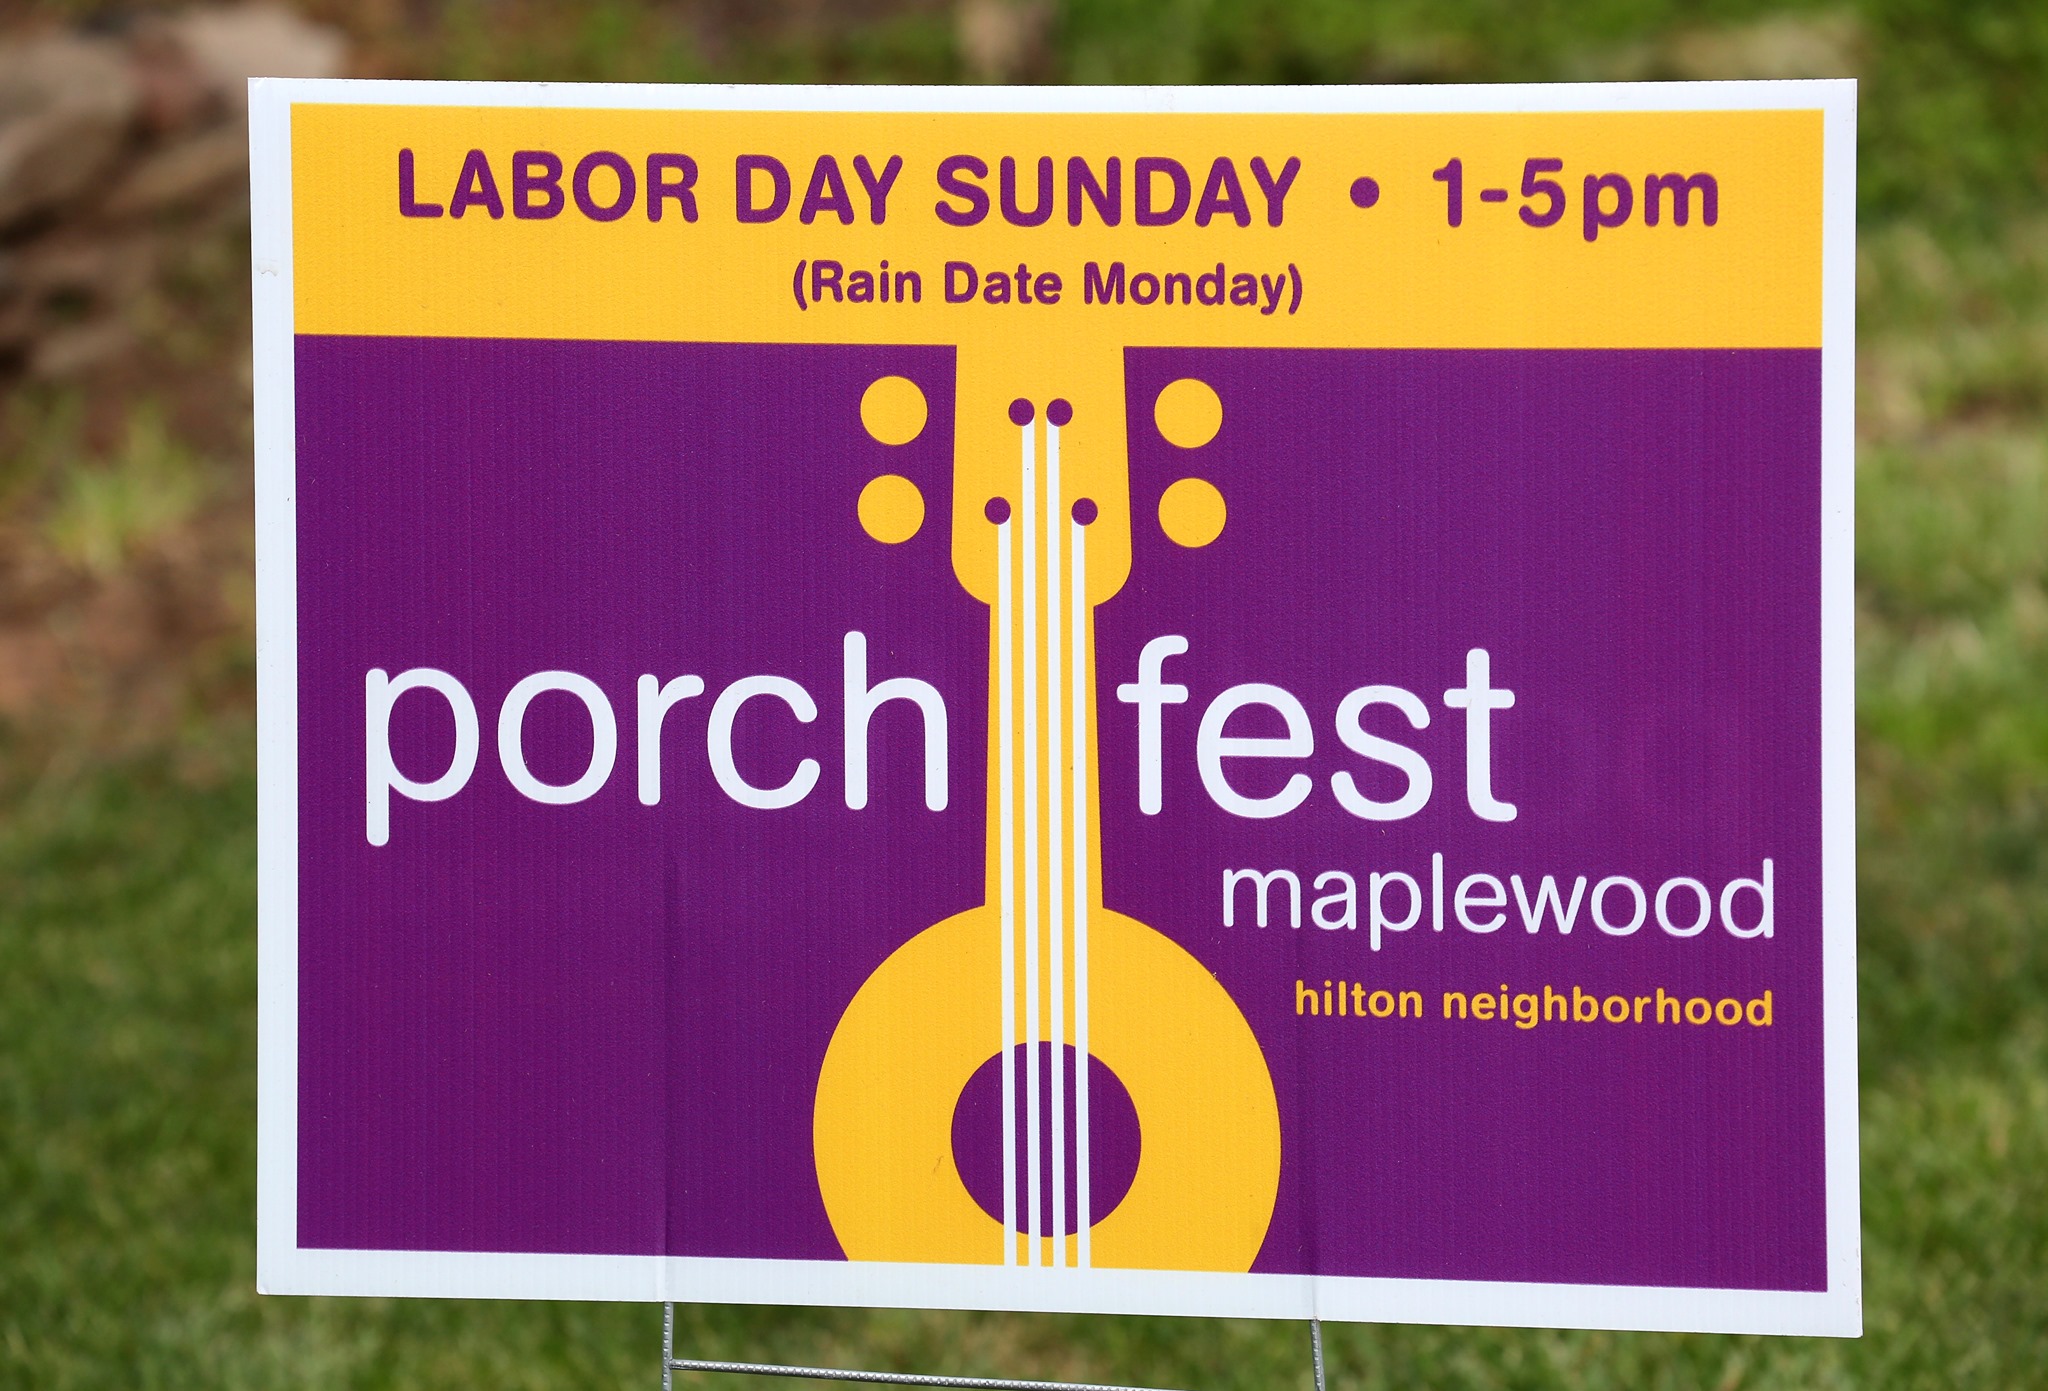 Maplewood Porchfest is back on 9/1 (rain date: 9/2)